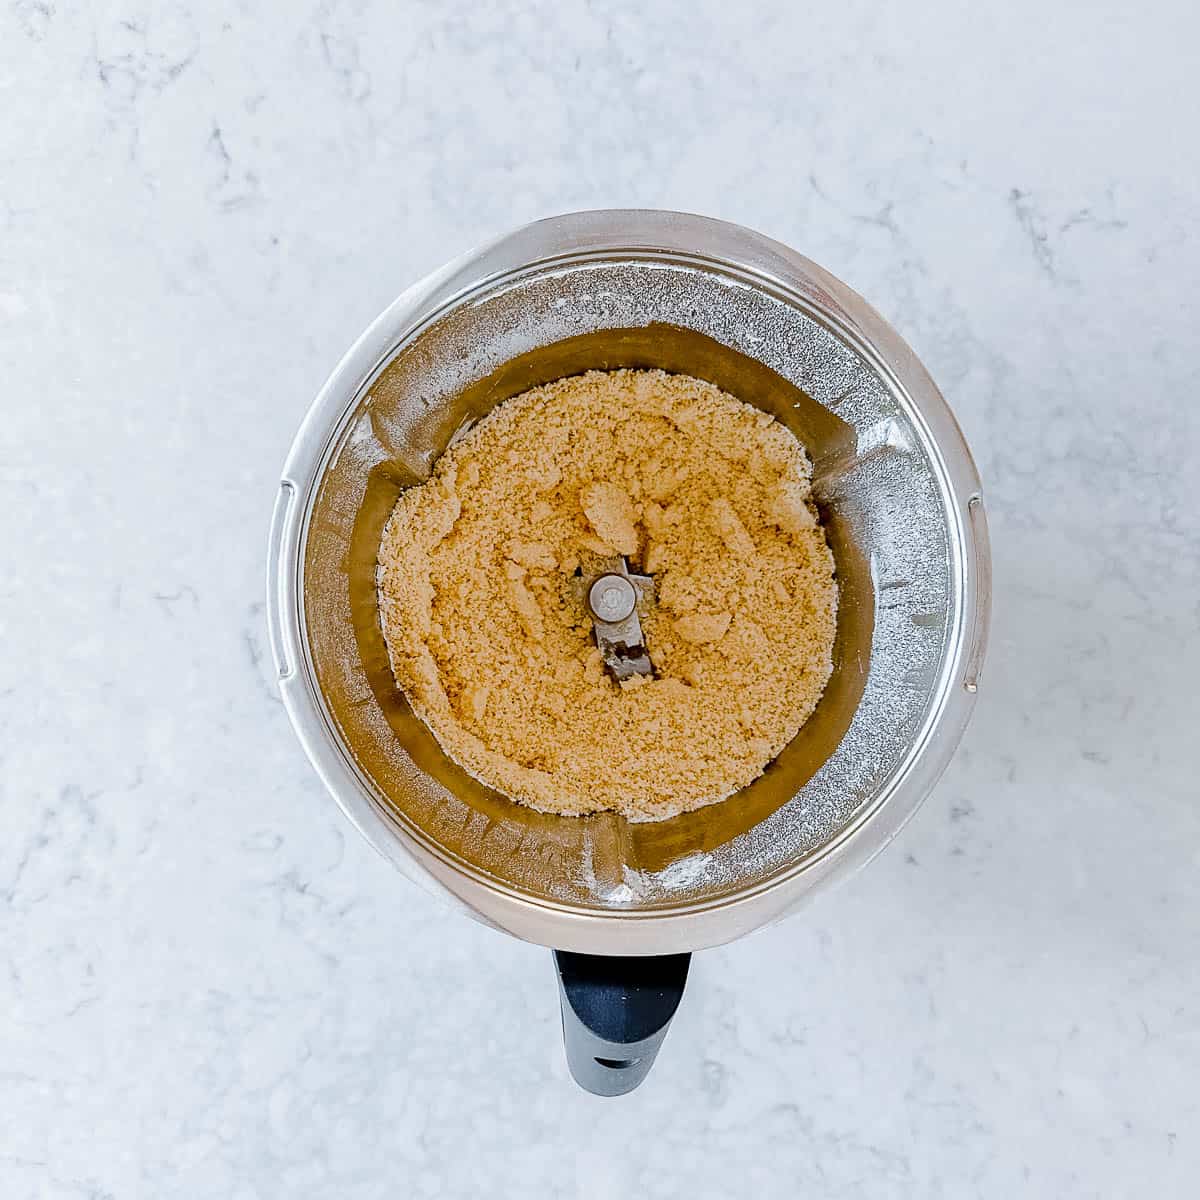 Butter and flour breadcrumbs in a Thermomix bowl.